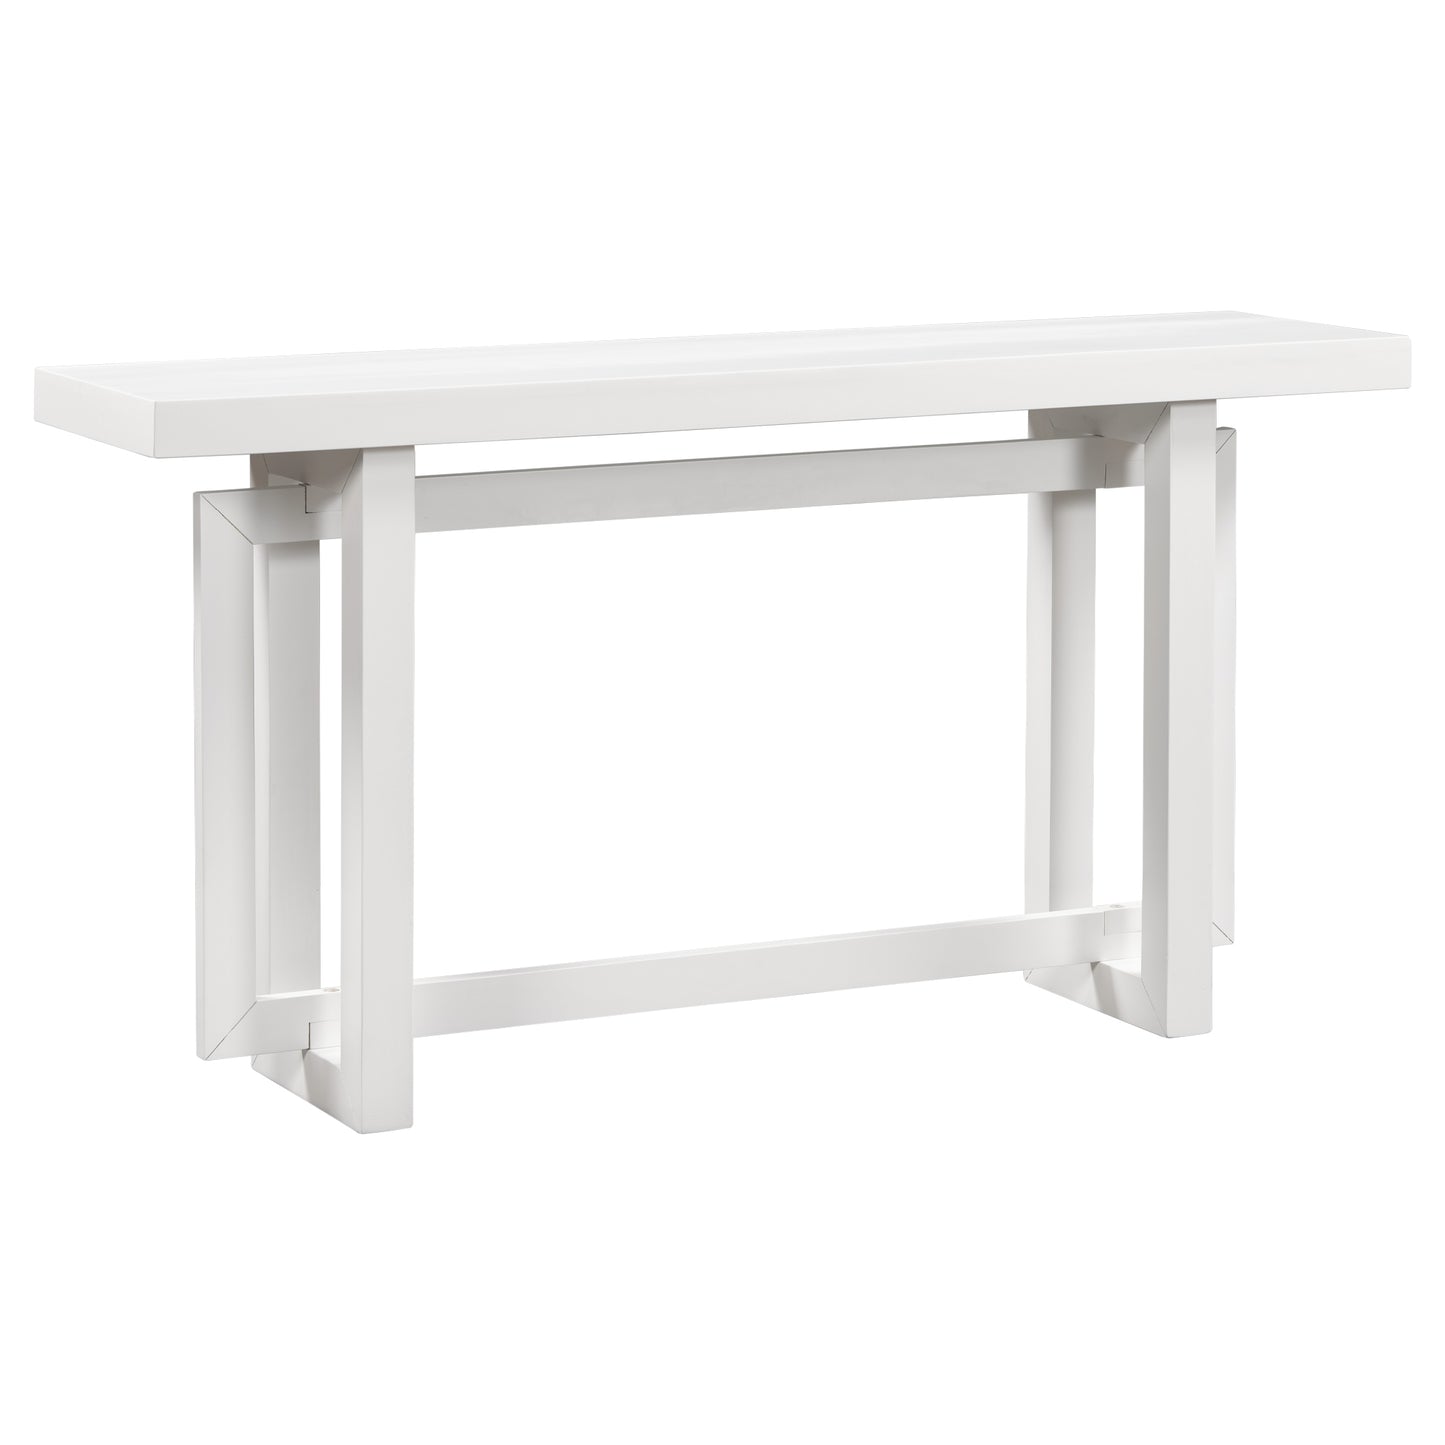 U_STYLE Contemporary Console Table with Wood Top, Extra Long Entryway Table for Entryway, Hallway, Living Room, Foyer, Corridor